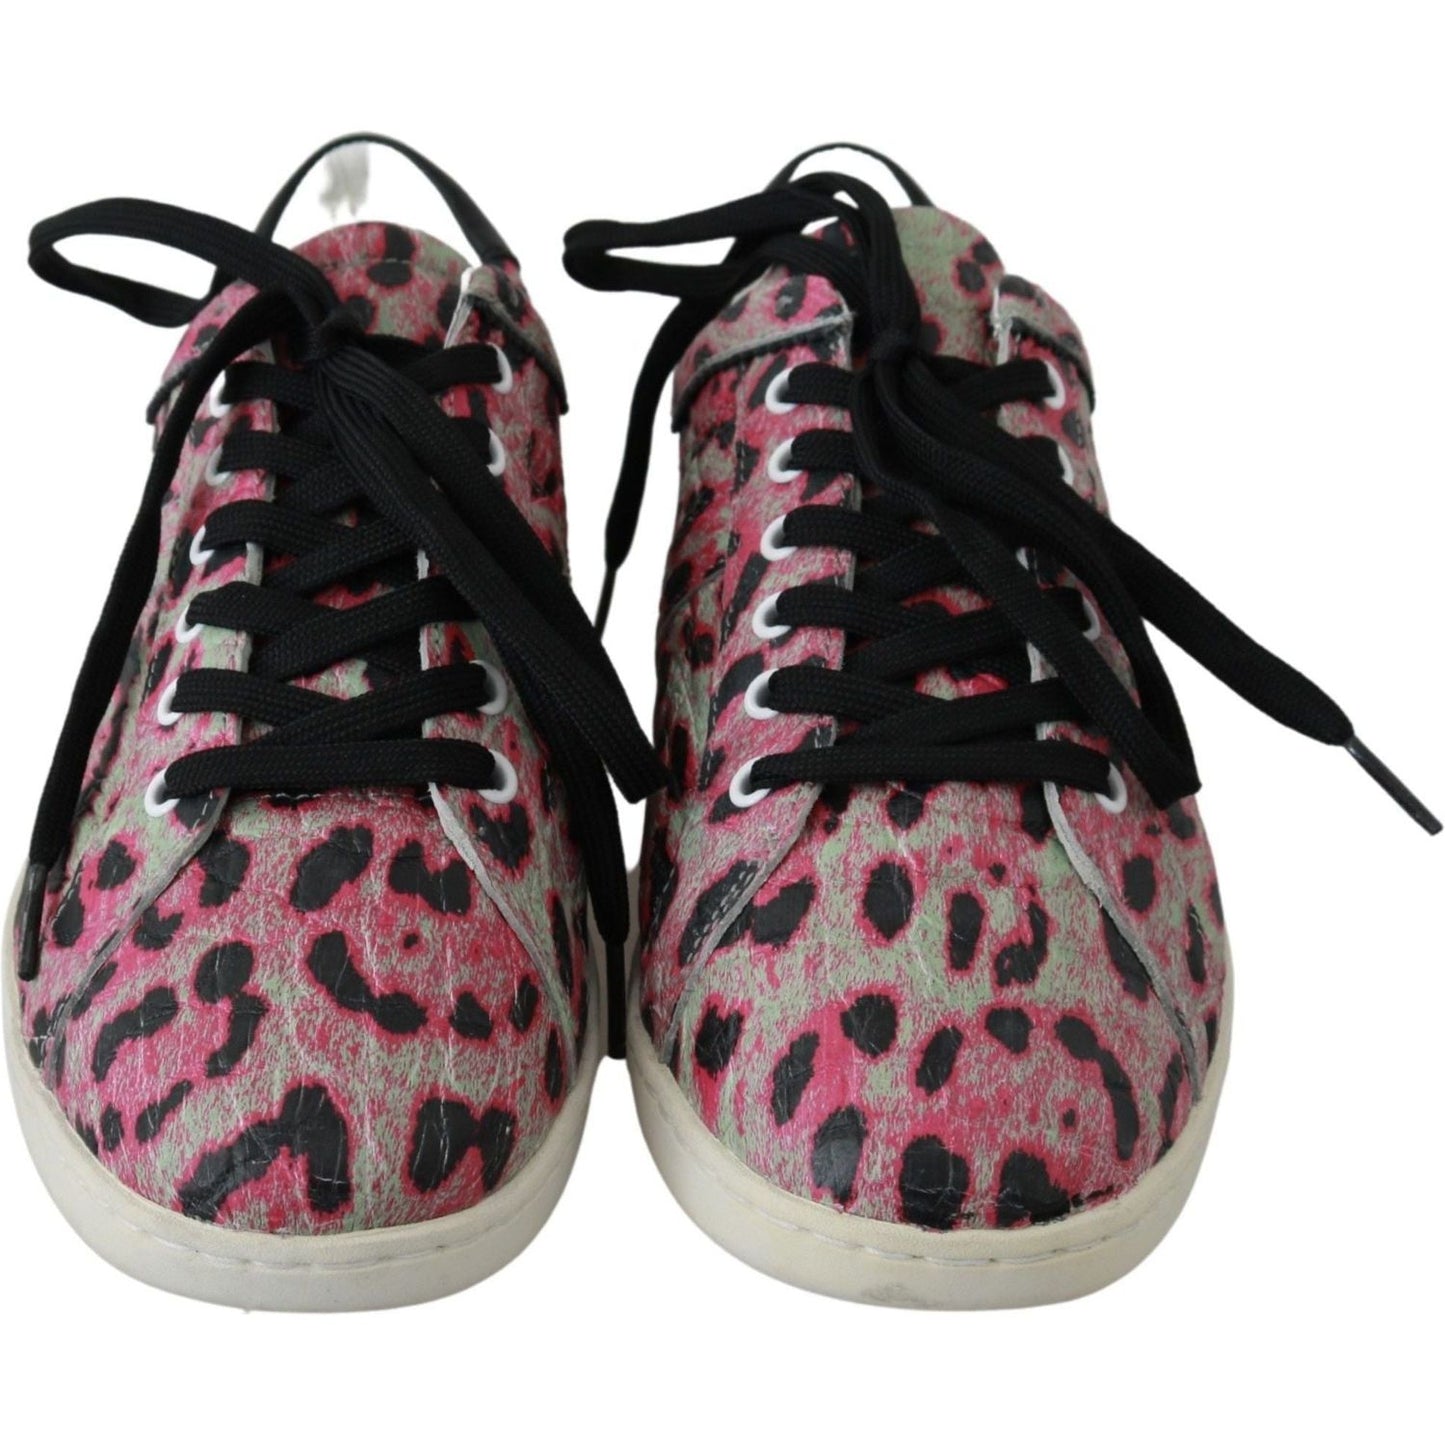 Dolce & Gabbana Multicolor Crocodile Leather Sneakers pink-leopard-print-training-leather-flat-sneakers IMG_9745-9dff4b10-00d.jpg